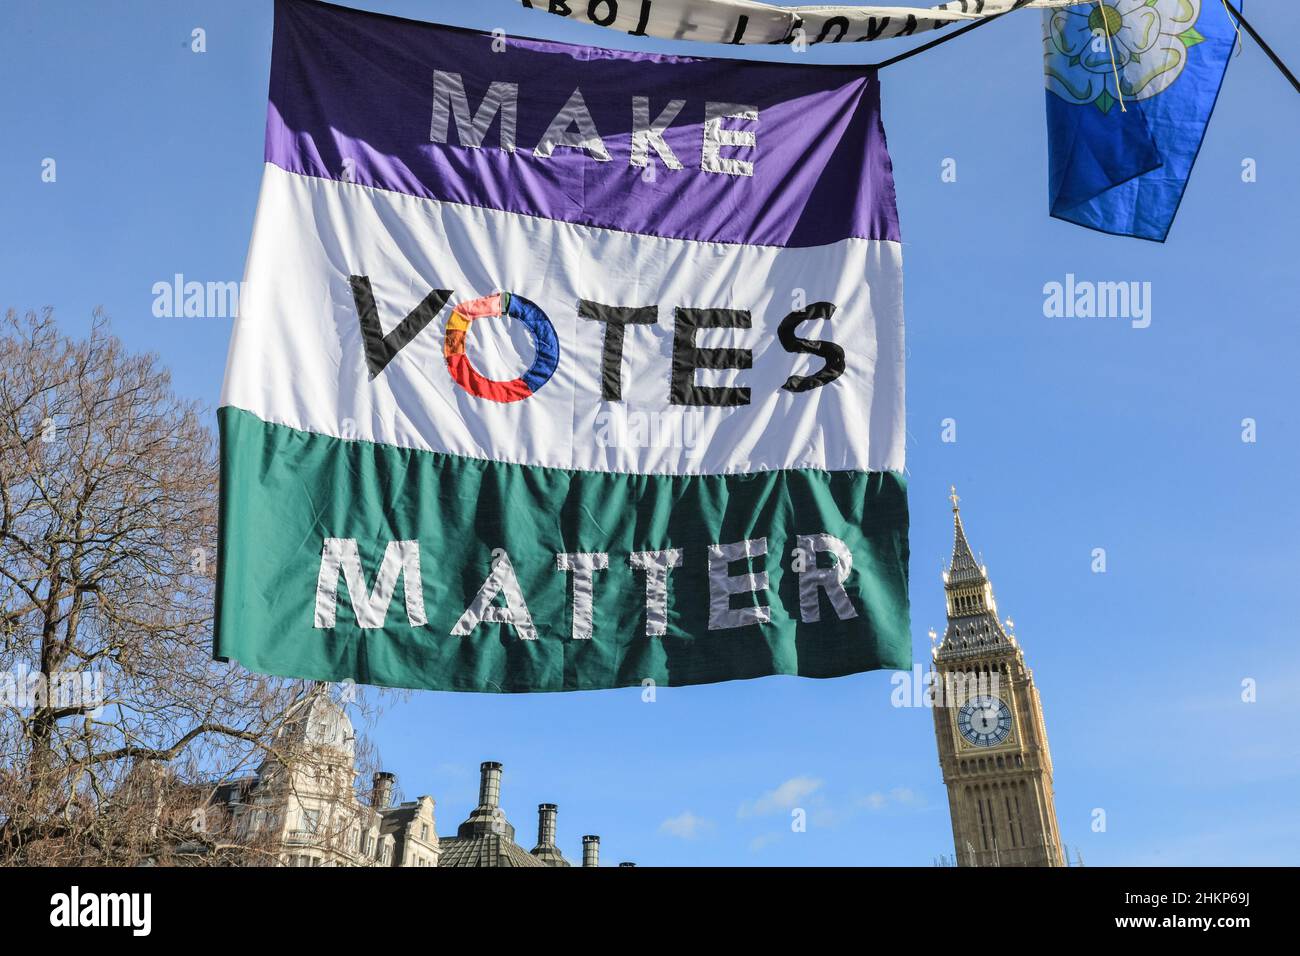 London, UK. 5th Feb, 2021. Protesters and speakers are gathered in Parliament Square for the 'Say No to the Elections Bill' rally, organised by Make Votes Matter, to support proportional representation in Parliament. Cross party speakers are joined by activists from the unions, Make Votes Matter, pro European groups, pro democracy and 'Resign Boris Johnson' protesters. Credit: Imageplotter/Alamy Live News Stock Photo